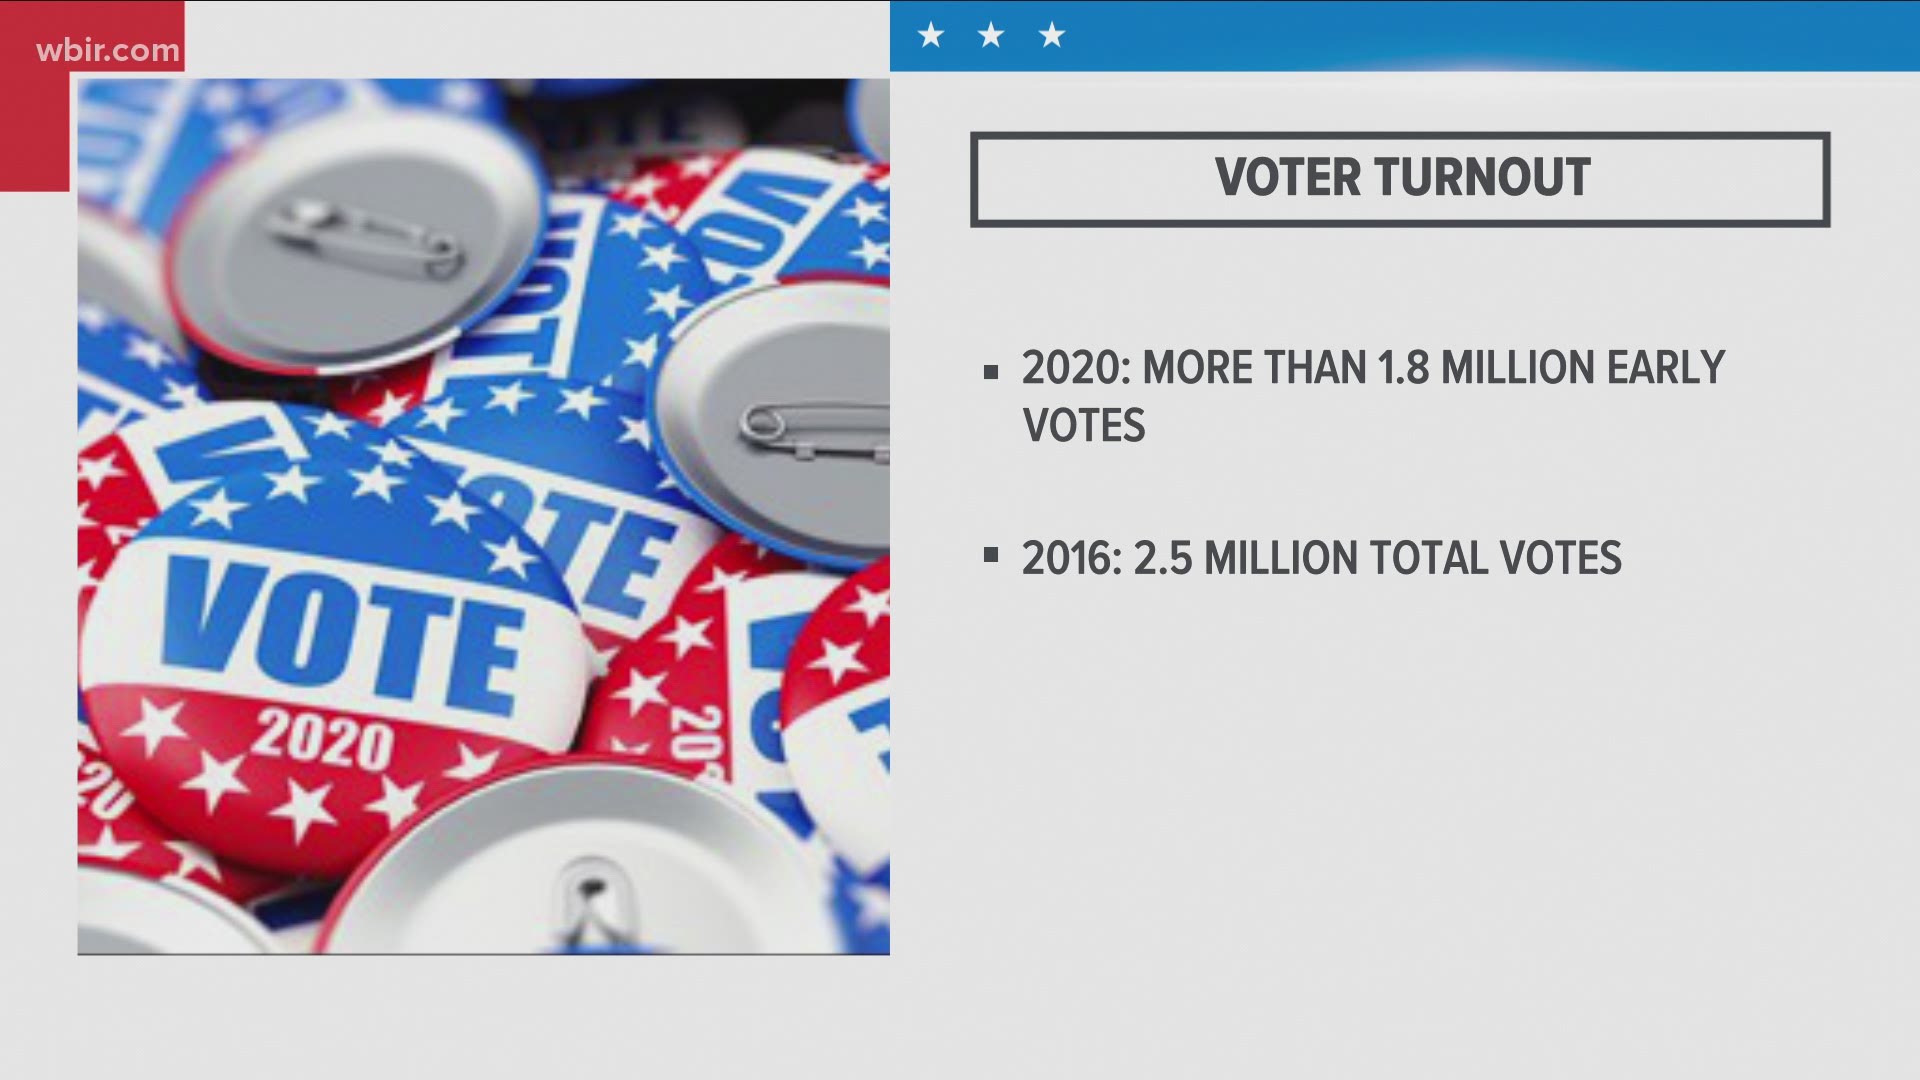 The state has already broken a record for voter turnout.